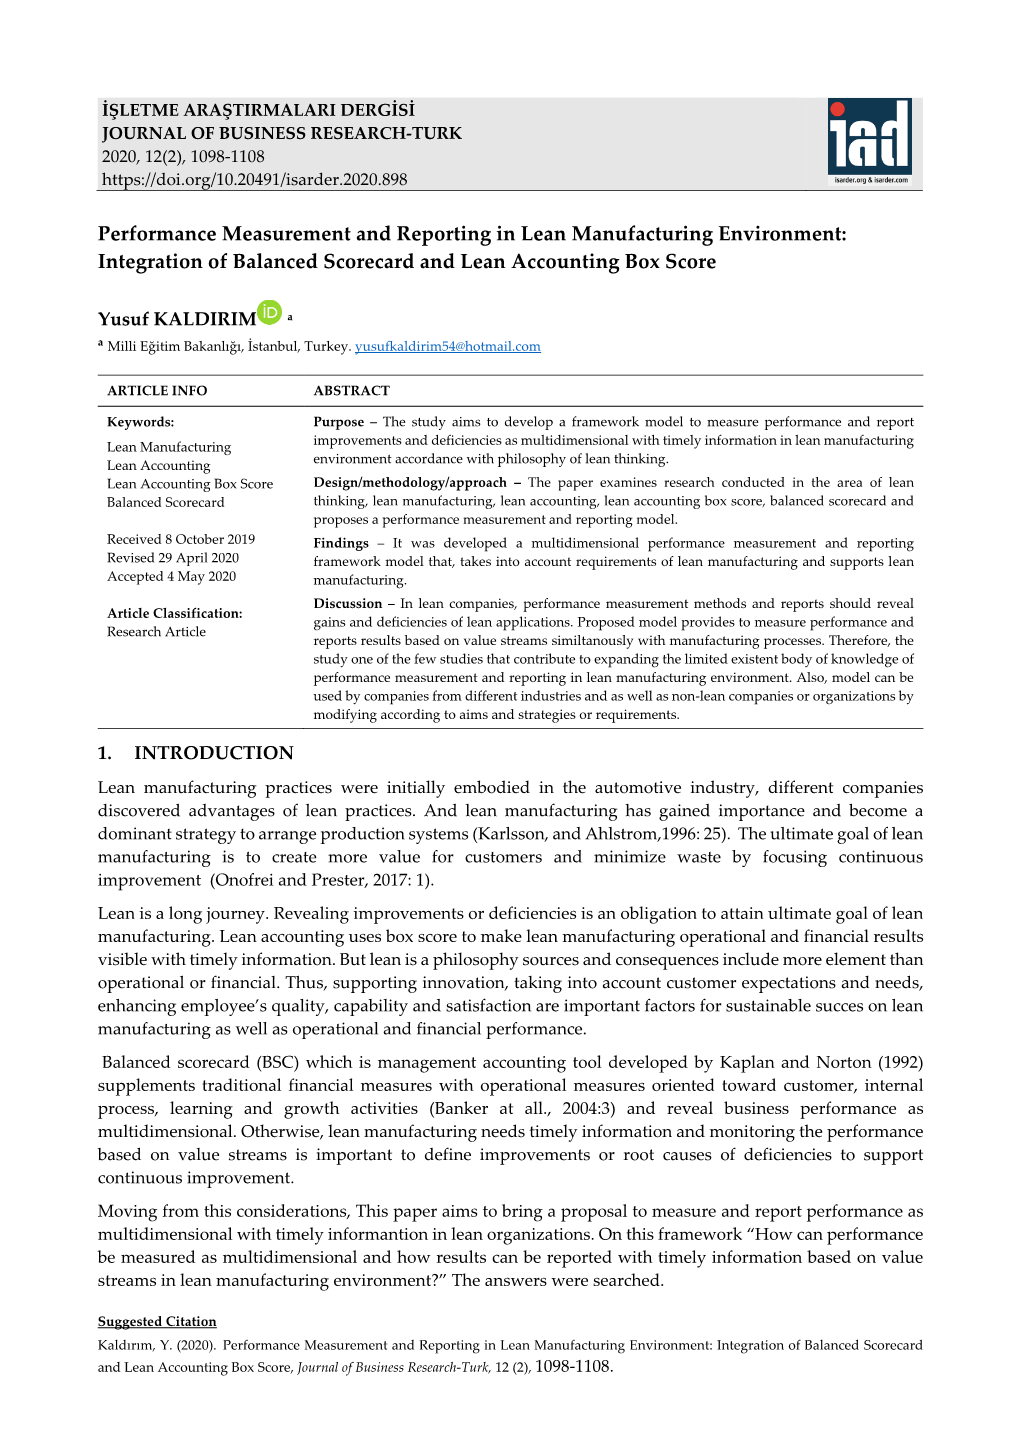 Performance Measurement and Reporting in Lean Manufacturing Environment: Integration of Balanced Scorecard and Lean Accounting Box Score